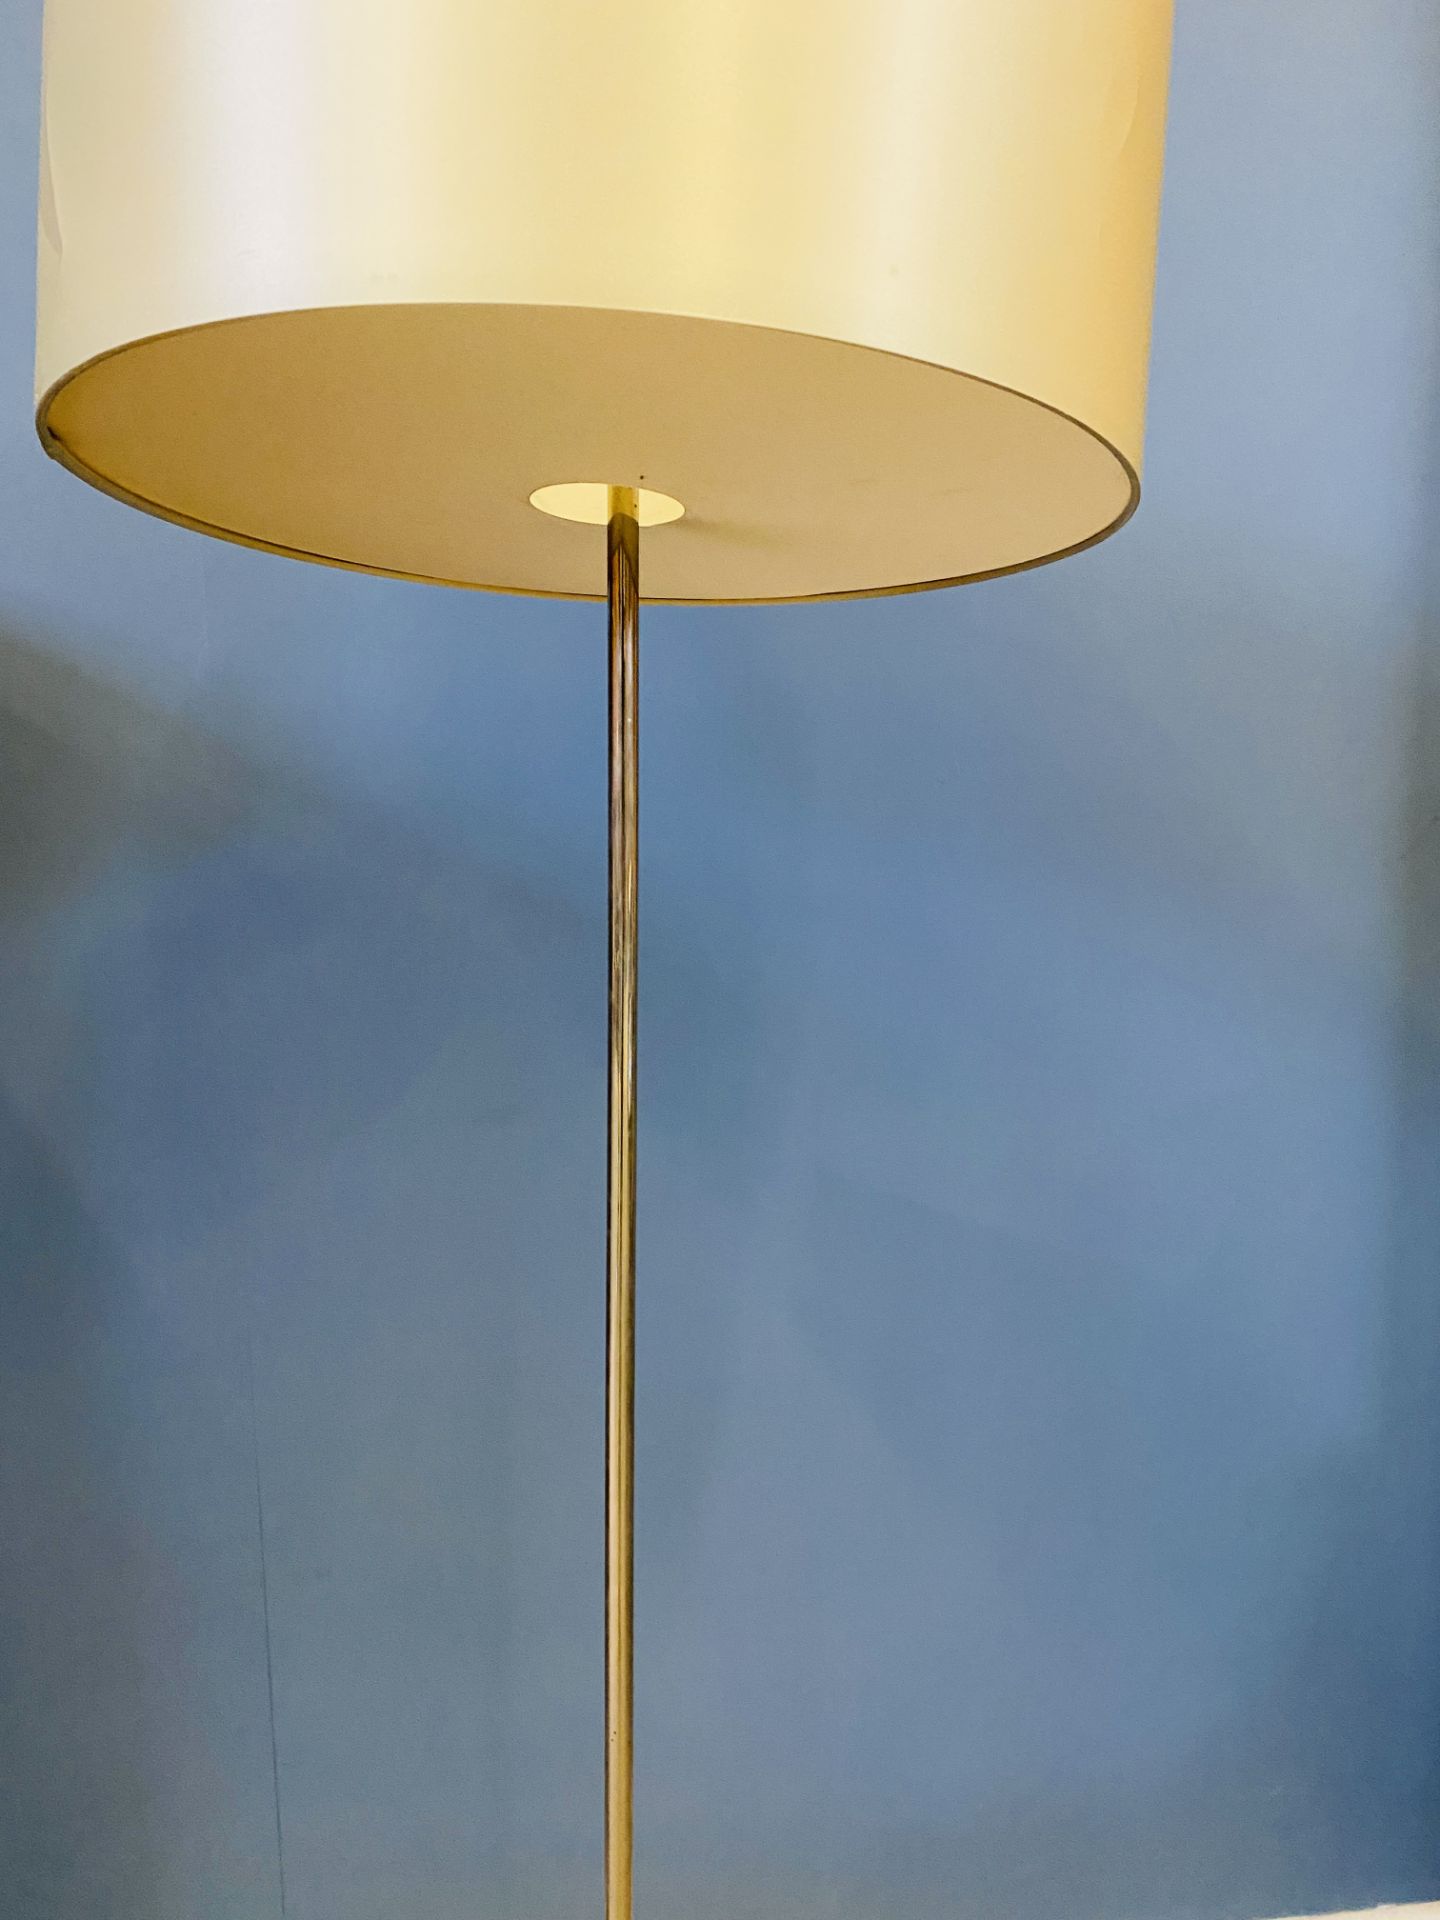 Contemporary standard lamp - Image 2 of 3